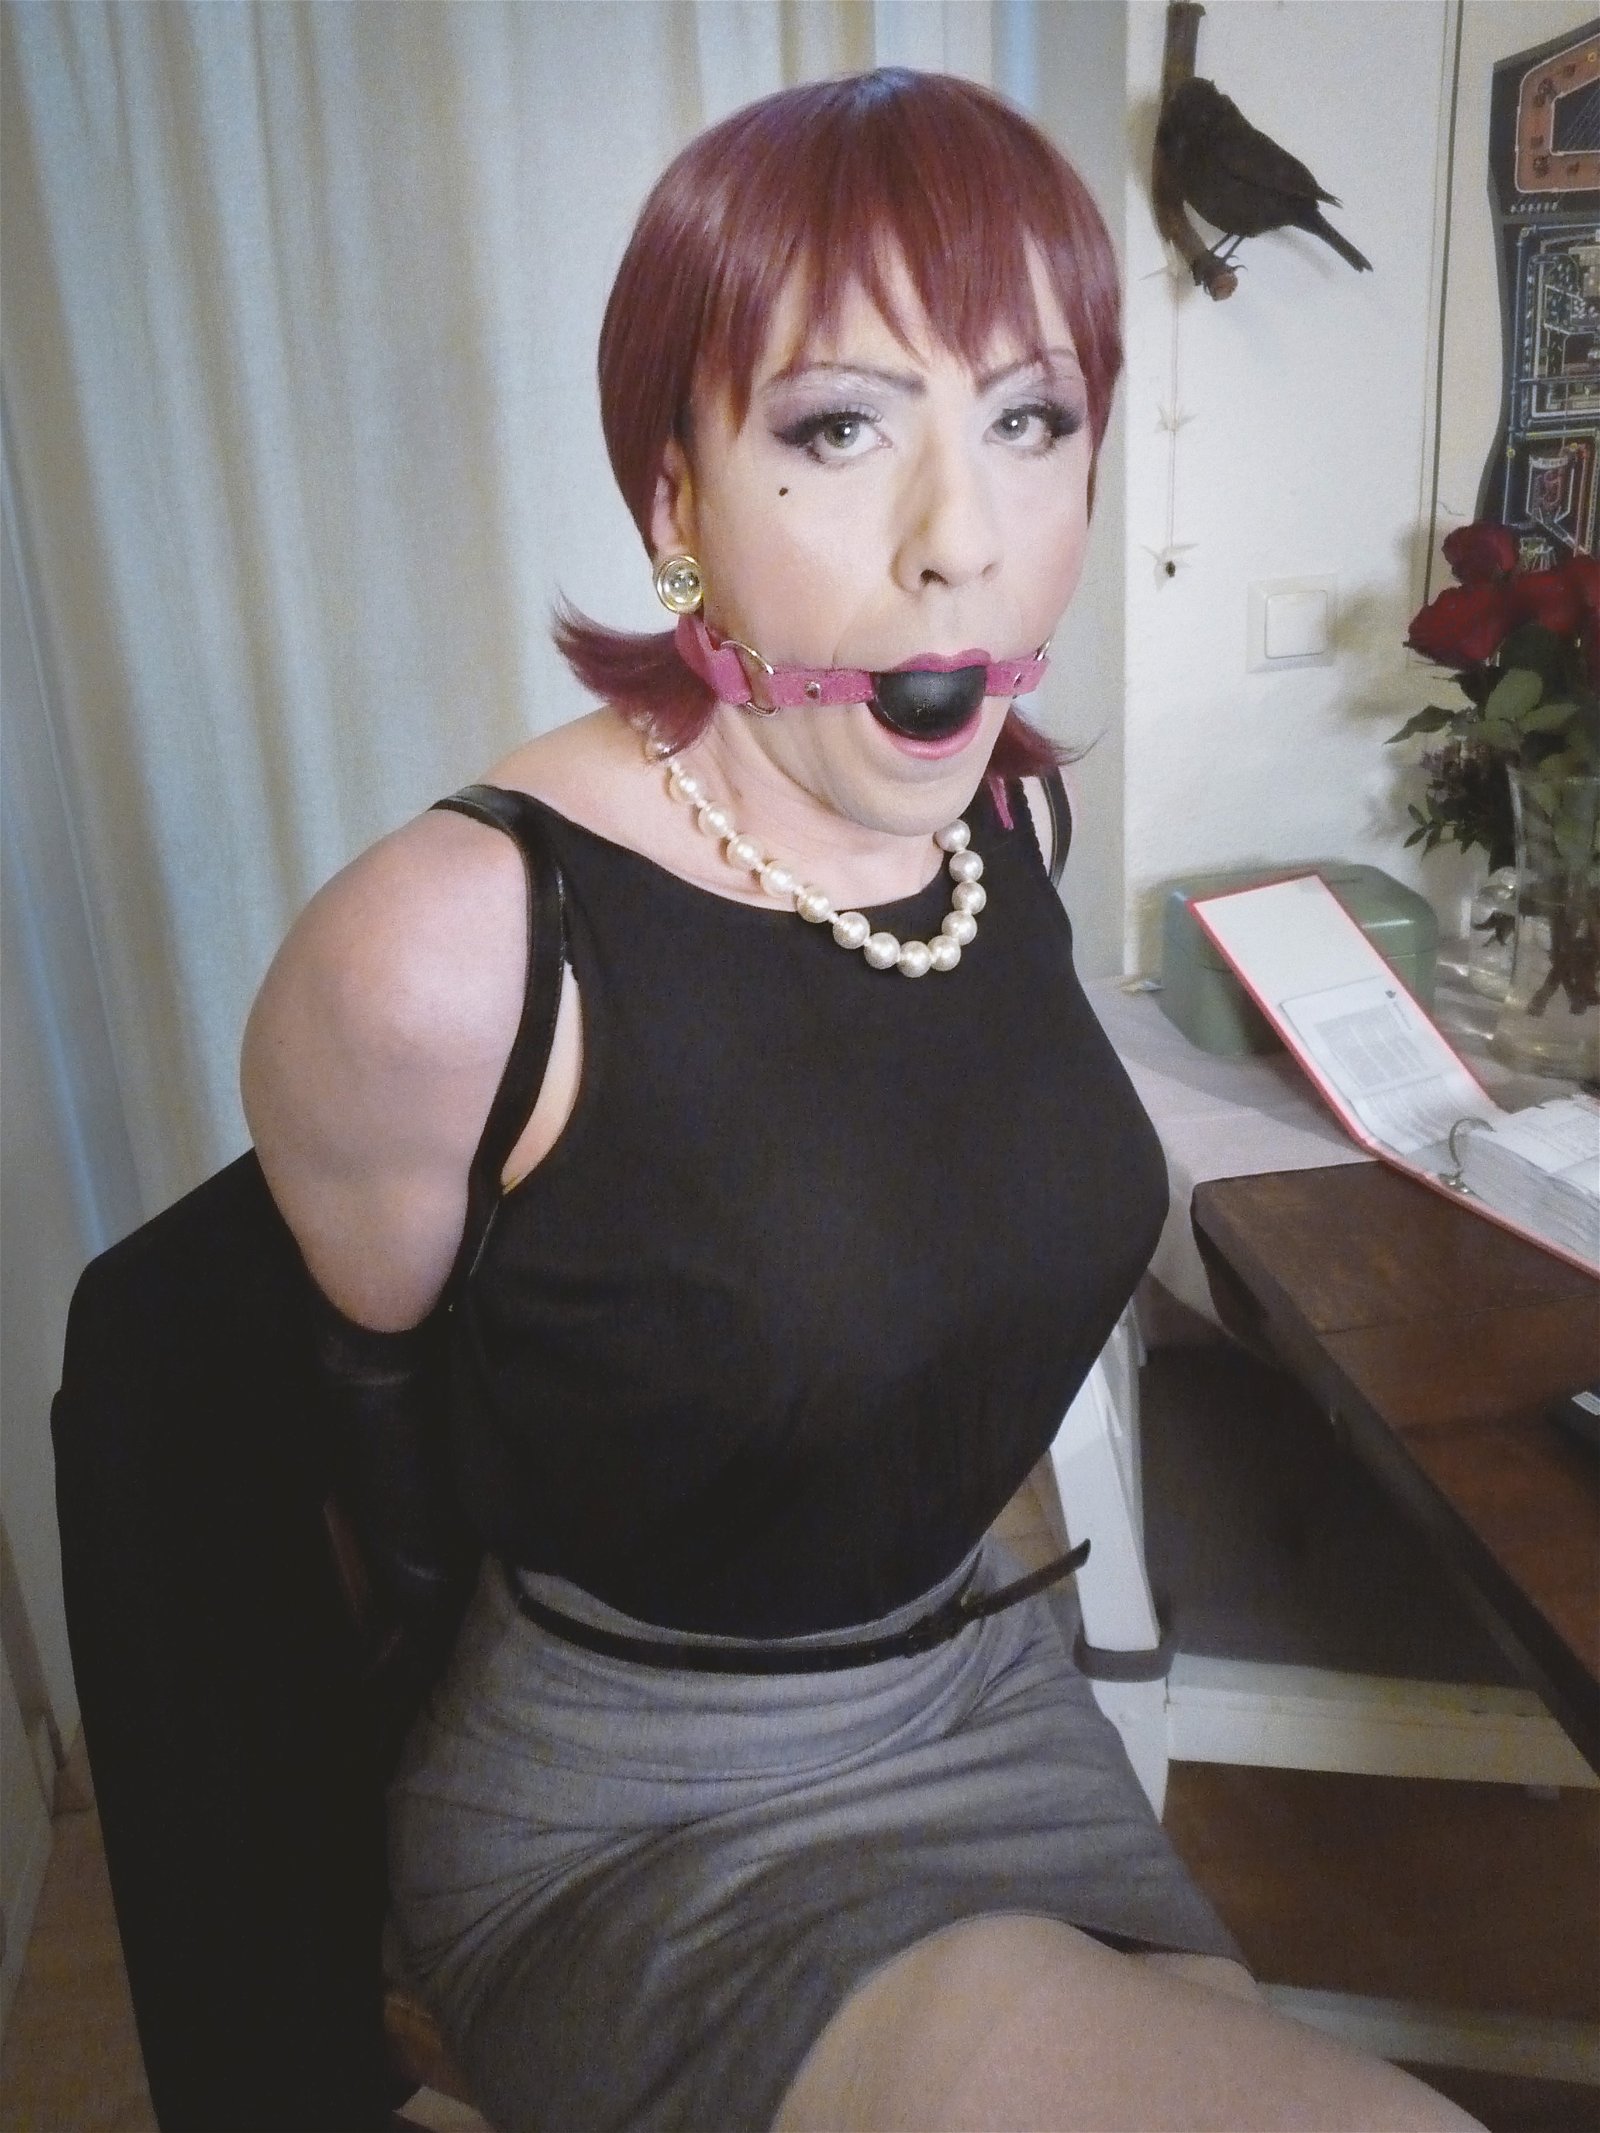 Photo by Madeleinelabelle with the username @Madeleinelabelle, who is a verified user,  December 14, 2018 at 6:44 AM. The post is about the topic transgender and the text says 'Classic Madeleine from a few yeara ago. 😊

#gag #secretary #armbinder #transvestite #fetish #fun #fantasy'